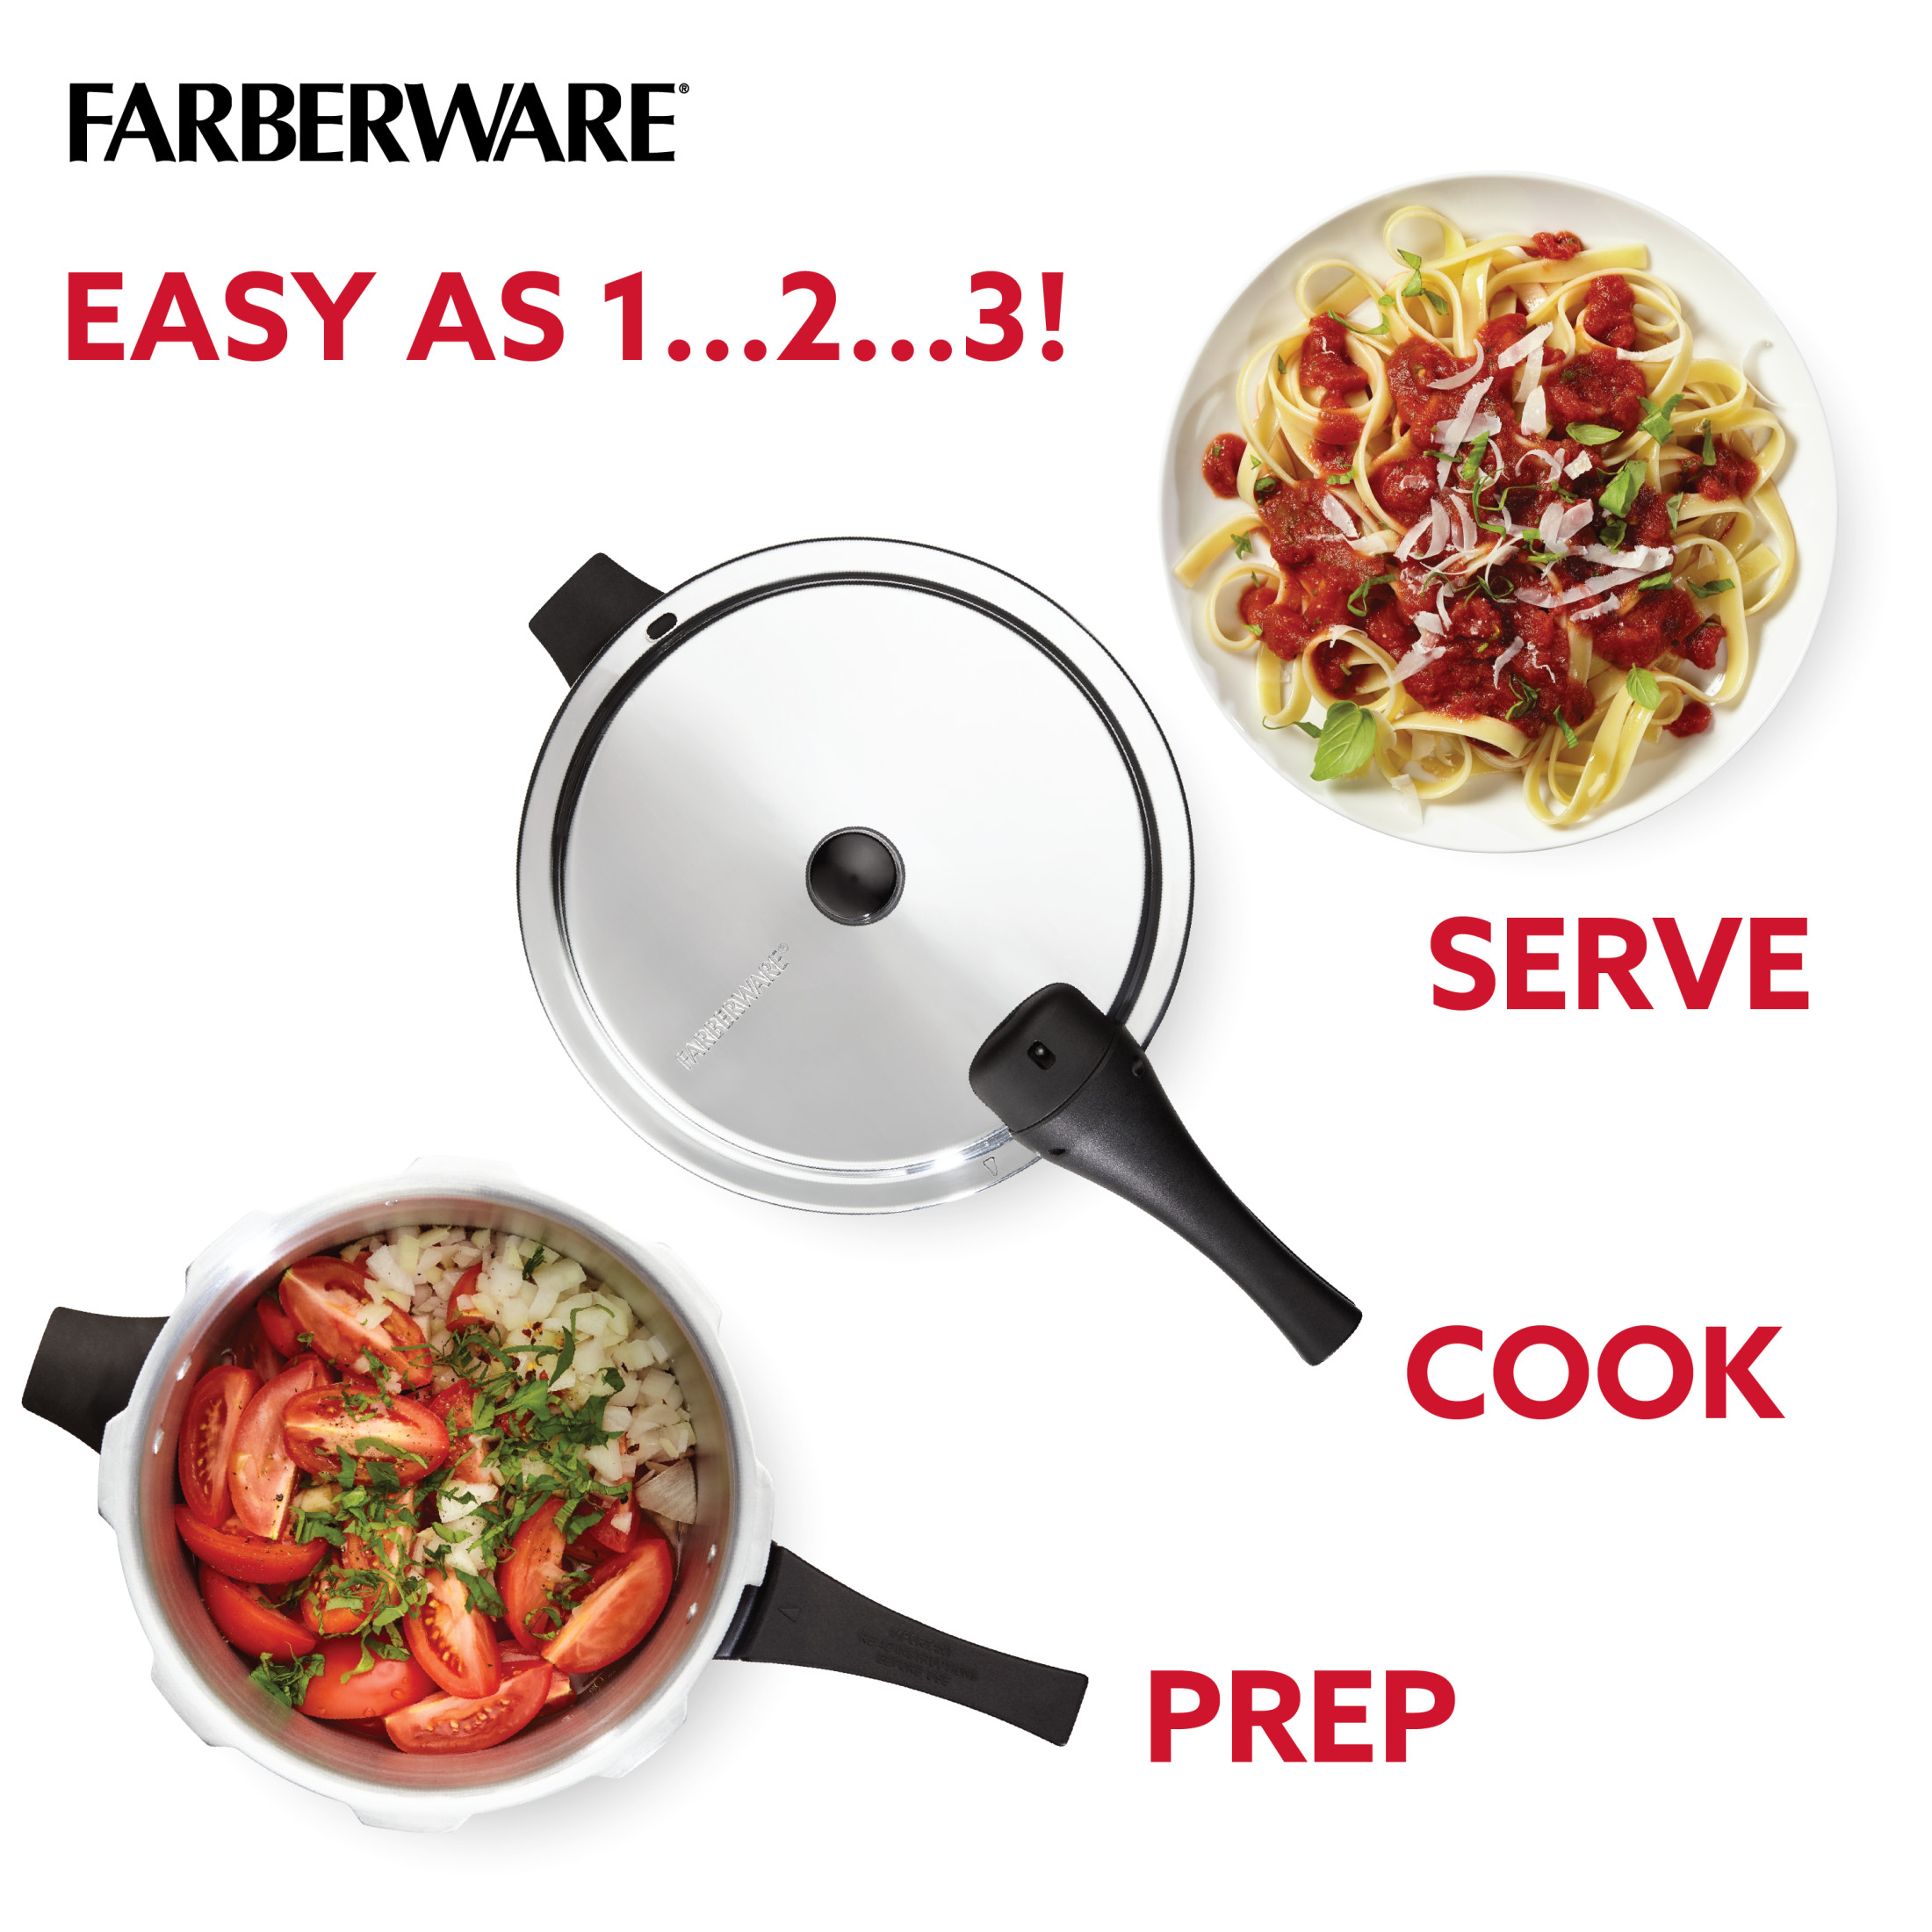 Farberware Stainless Steel Induction Stovetop Pressure Cooker, 8-Quart - image 3 of 12